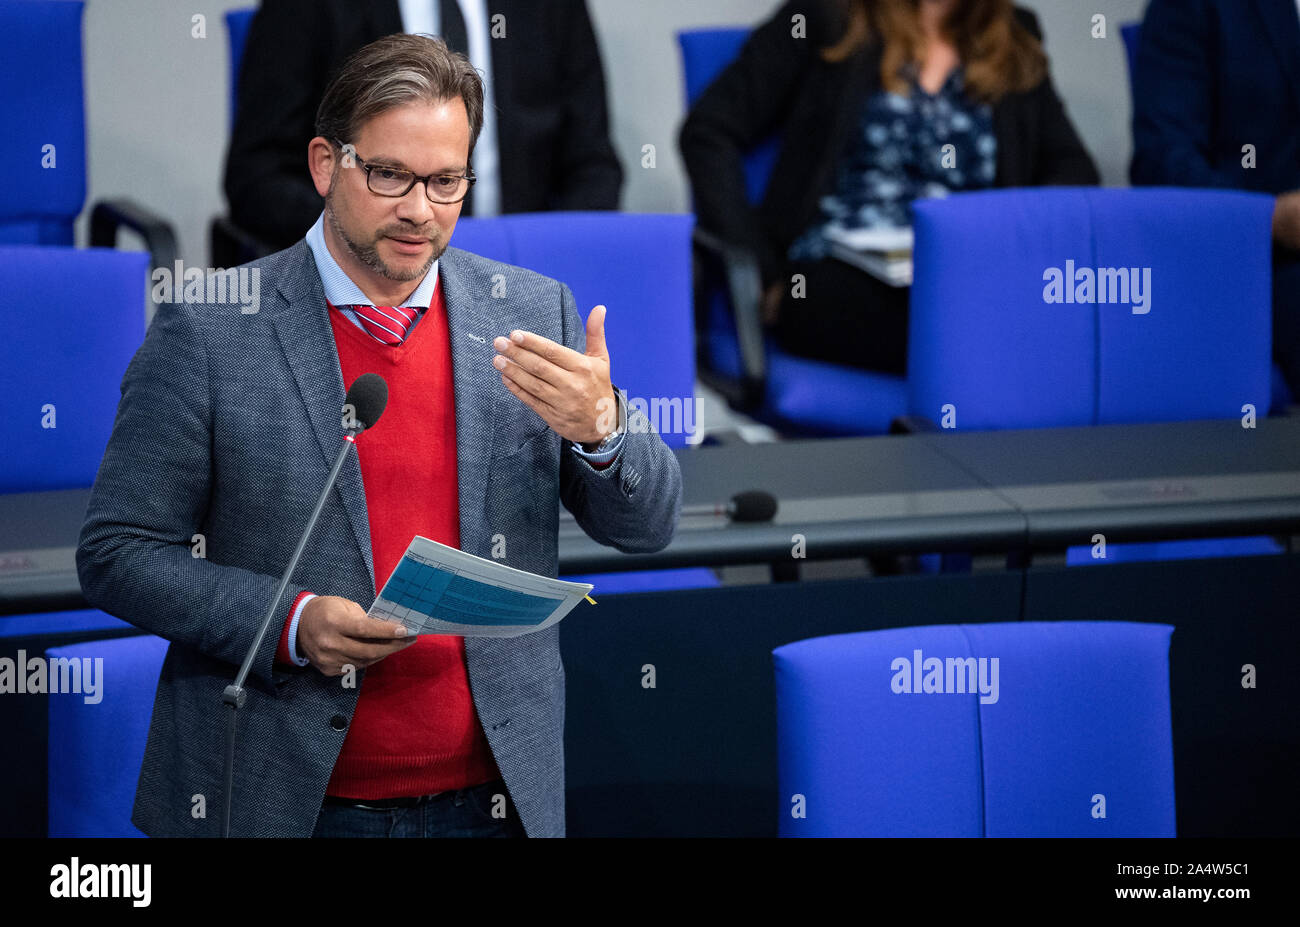 Berlin, Germany. 16th Oct, 2019. Florian Pronold (SPD), Parliamentary State Secretary in the Federal Ministry for the Environment, Nature Conservation and Nuclear Safety, will answer questions from members of the German Bundestag during Question Time at the plenary session of the German Bundestag. The main topics of the 117th session of the 19th legislative period are bills of the Federal Government on property tax reform, the questioning of the Federal Government and a current hour on the invasion of Turkey in Syria. Credit: Bernd von Jutrczenka/dpa/Alamy Live News Stock Photo